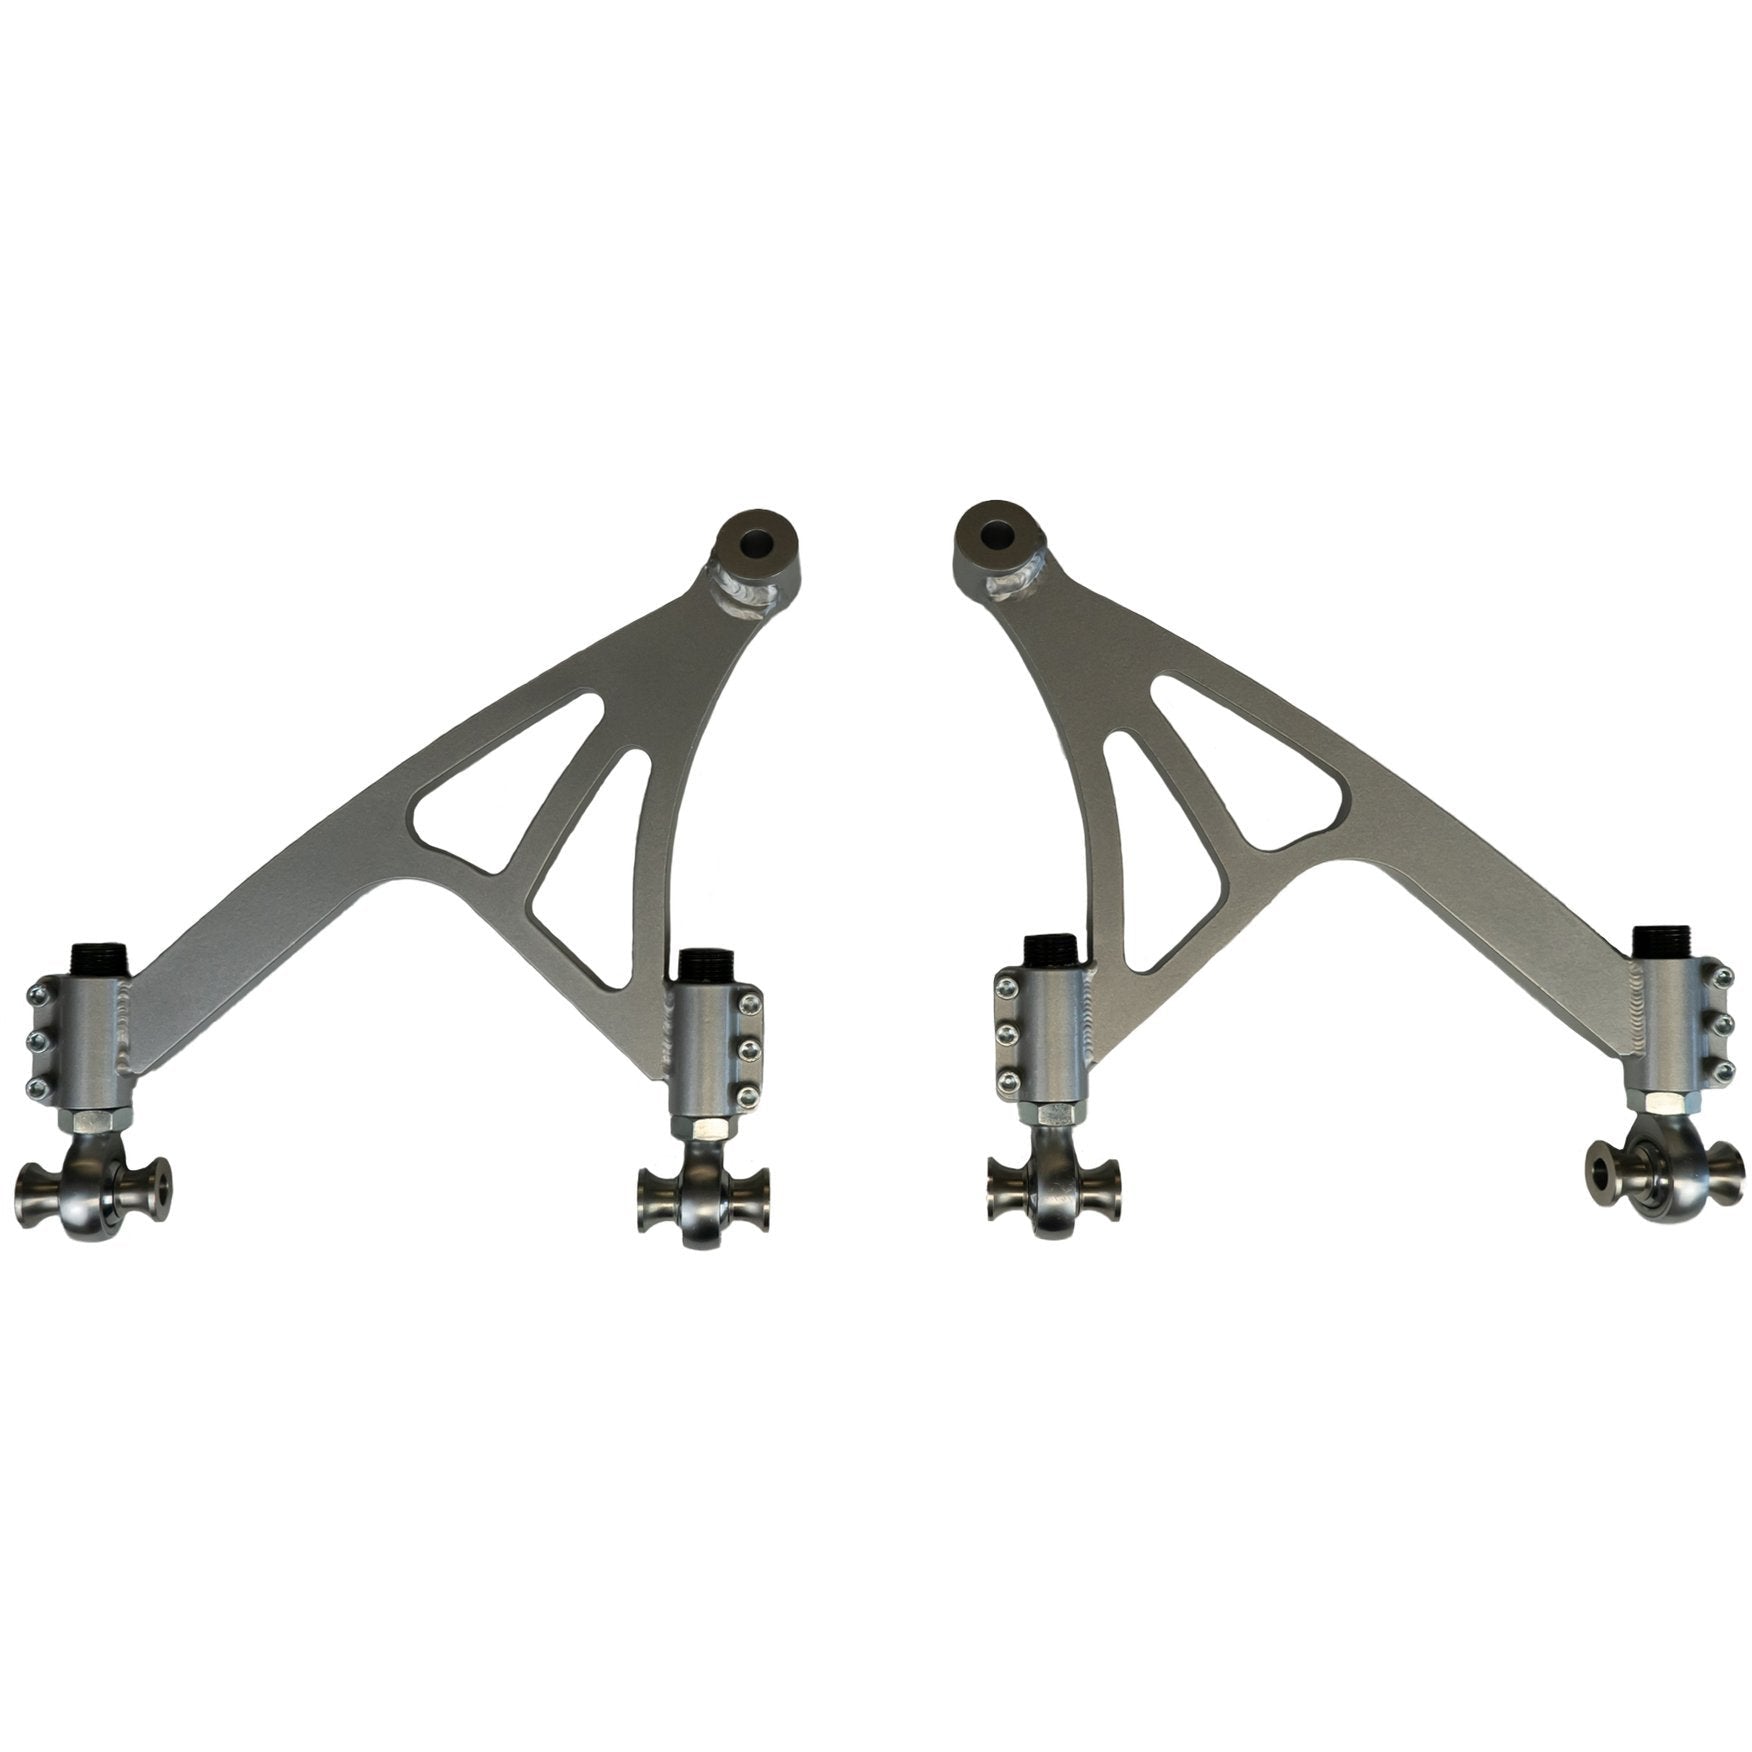 FDF Raceshop Mild Mantis Angle Kit, Upper Rear Control Arm, Front Lower Control Arms & Eccentric Lockout Kit FI Performance